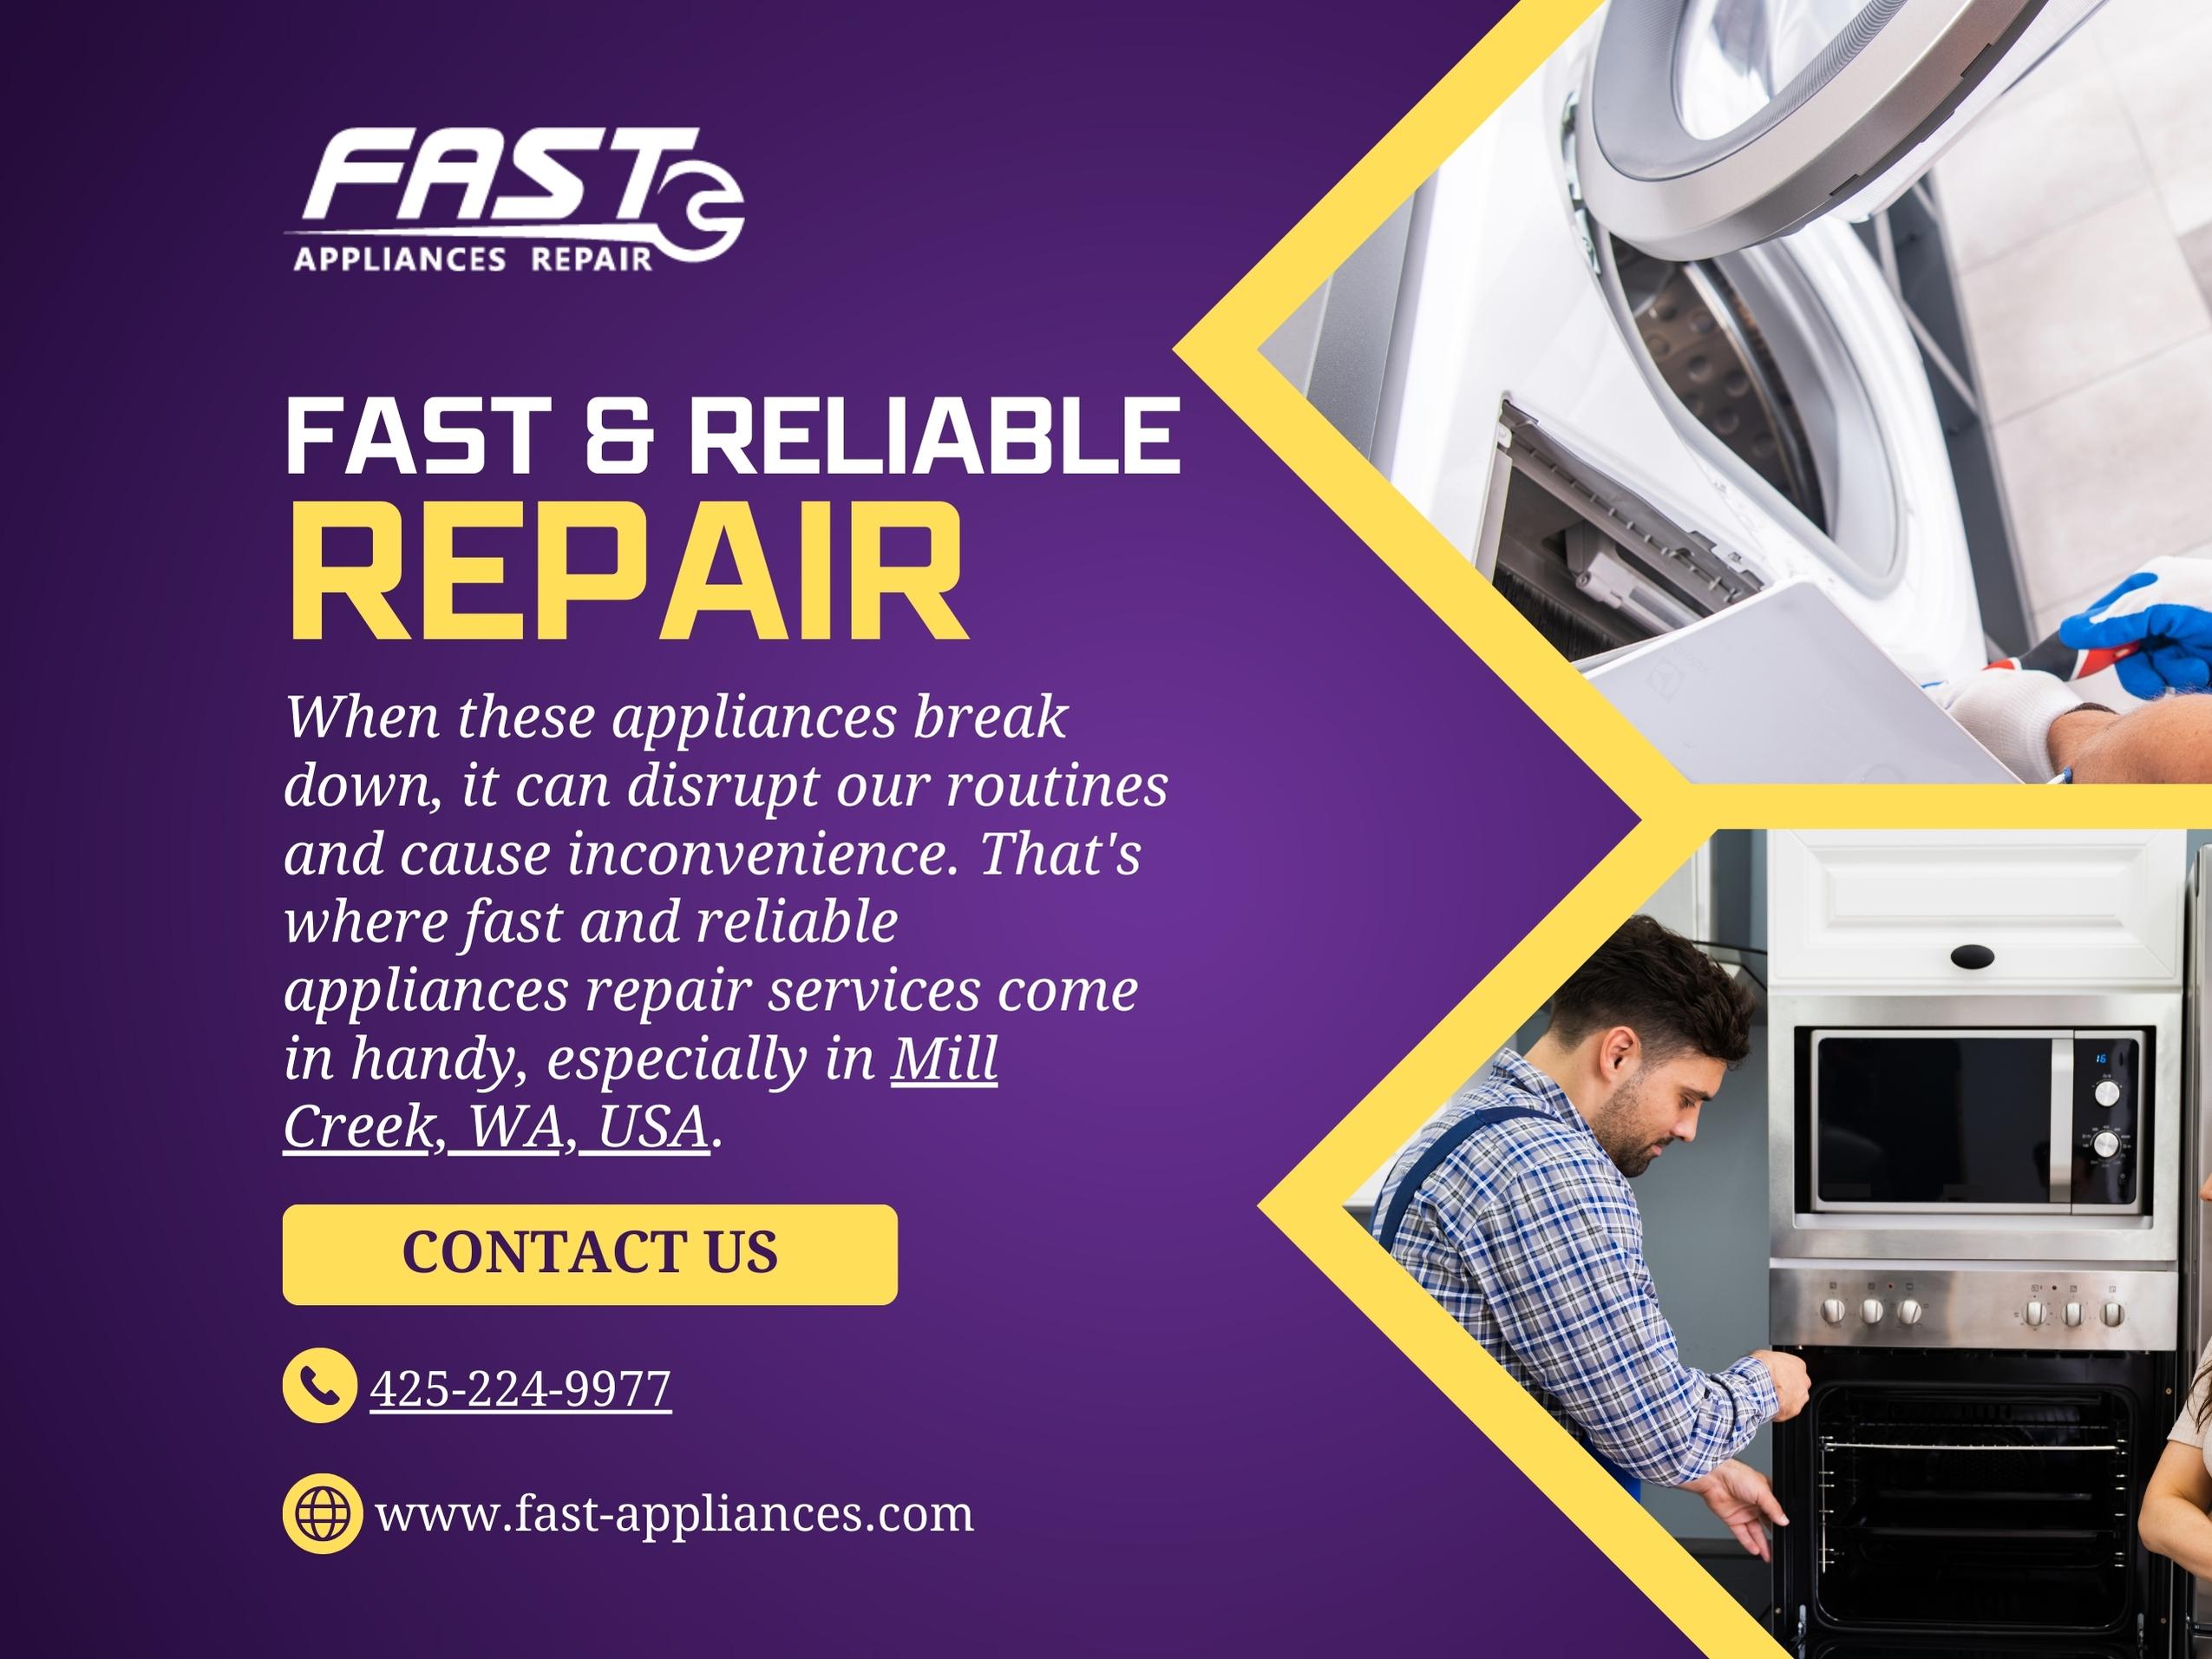 Fast and Reliable Appliances Repair in Mill Creek, WA, USA